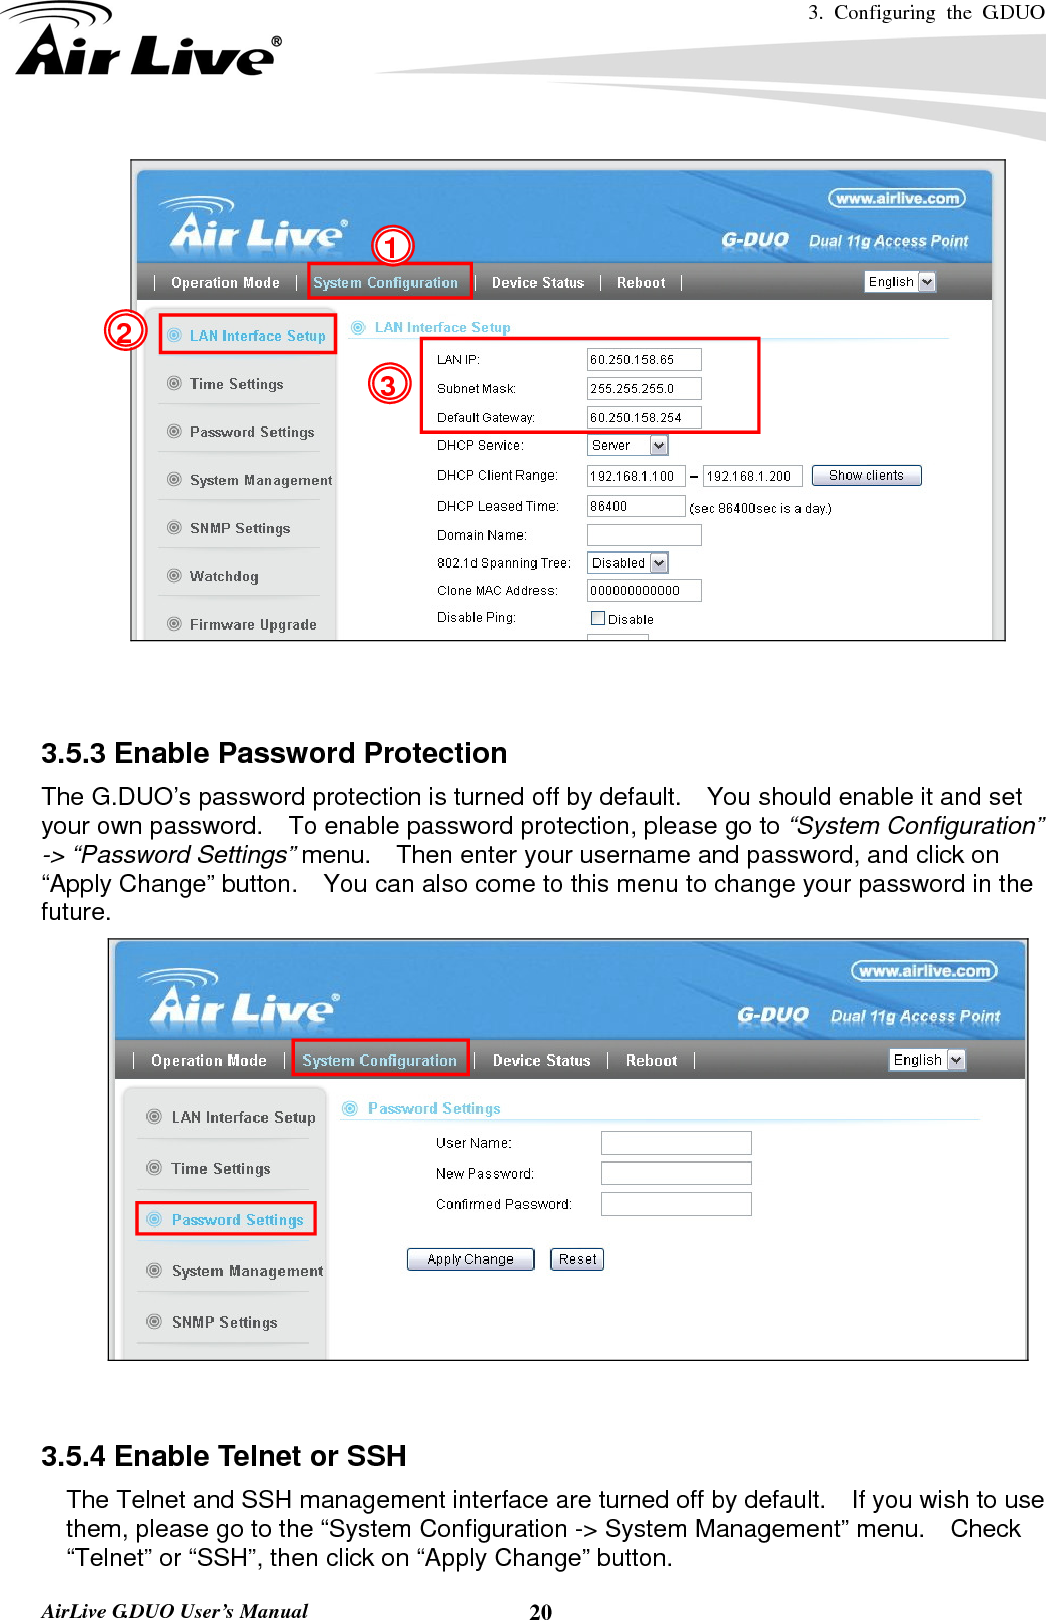 3. Configuring the G.DUO   AirLive G.DUO User’s Manual  20   3.5.3 Enable Password Protection The G.DUO’s password protection is turned off by default.    You should enable it and set your own password.    To enable password protection, please go to “System Configuration” -&gt; “Password Settings” menu.    Then enter your username and password, and click on “Apply Change” button.    You can also come to this menu to change your password in the future.    3.5.4 Enable Telnet or SSH     The Telnet and SSH management interface are turned off by default.    If you wish to use them, please go to the “System Configuration -&gt; System Management” menu.  Check “Telnet” or “SSH”, then click on “Apply Change” button. 1 2 3 